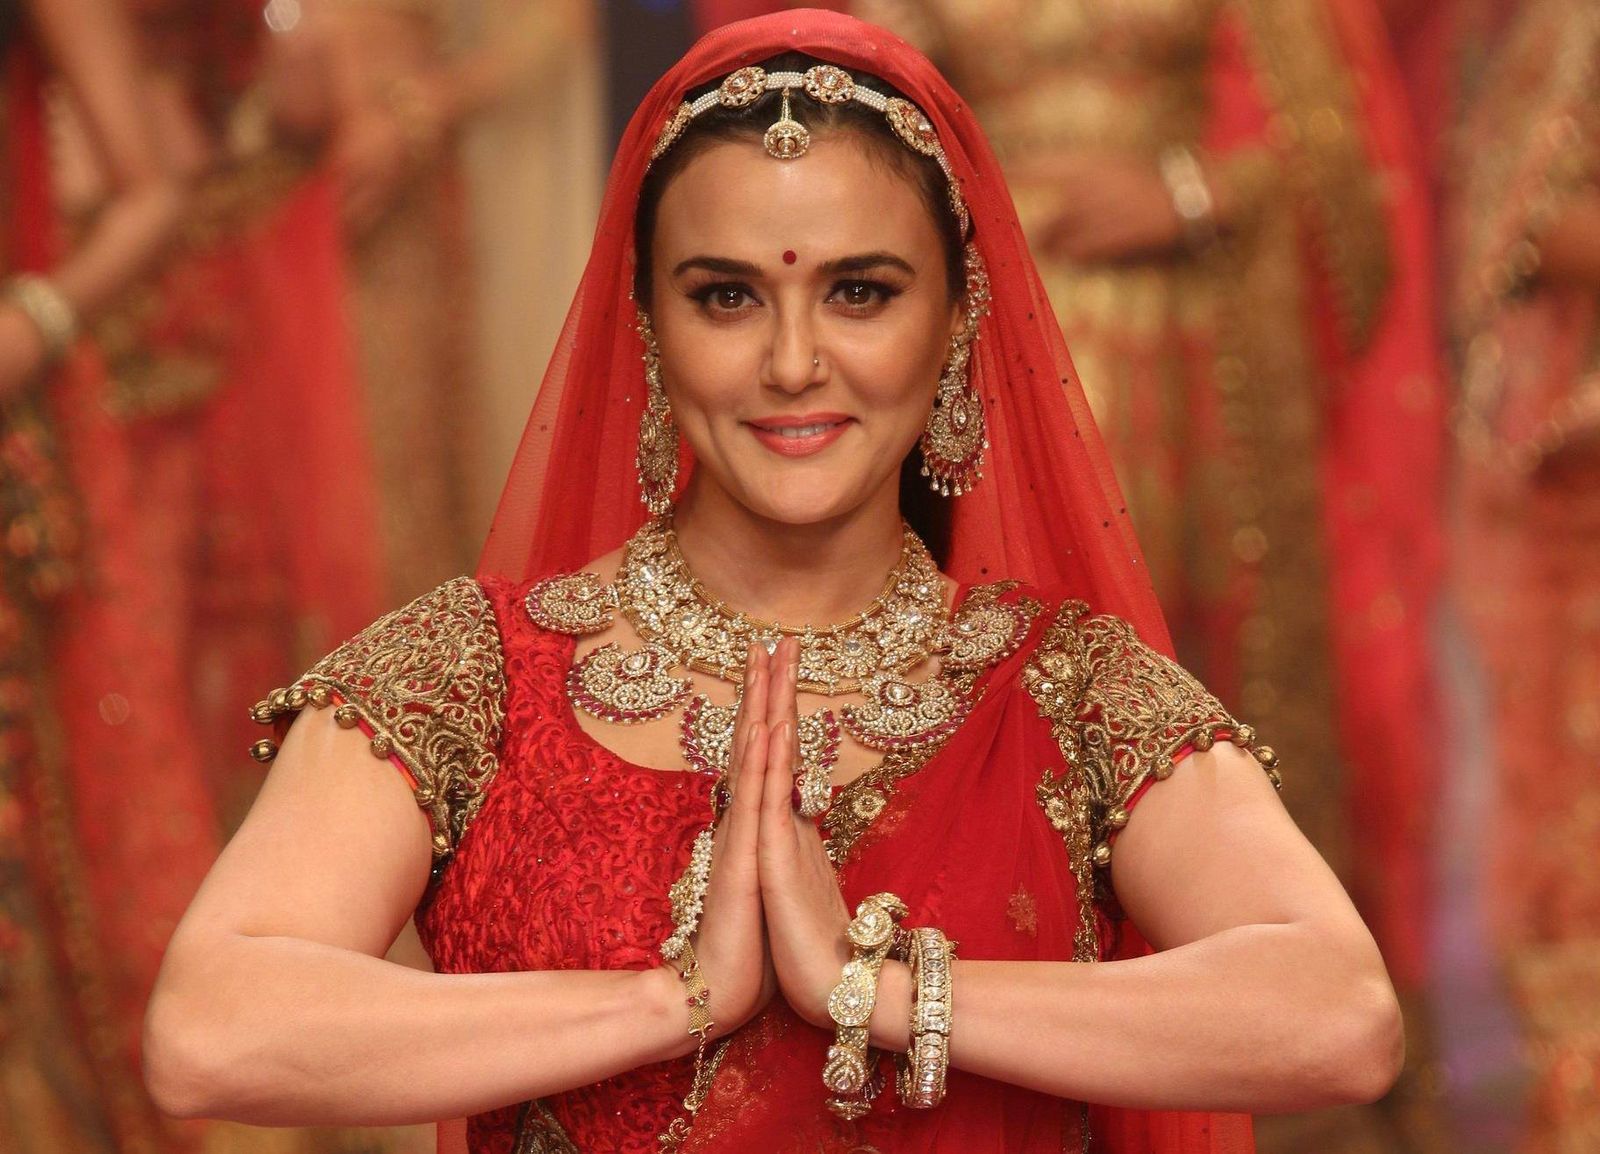 Preity Zinta Is All Set To Get Married in 2 Days?